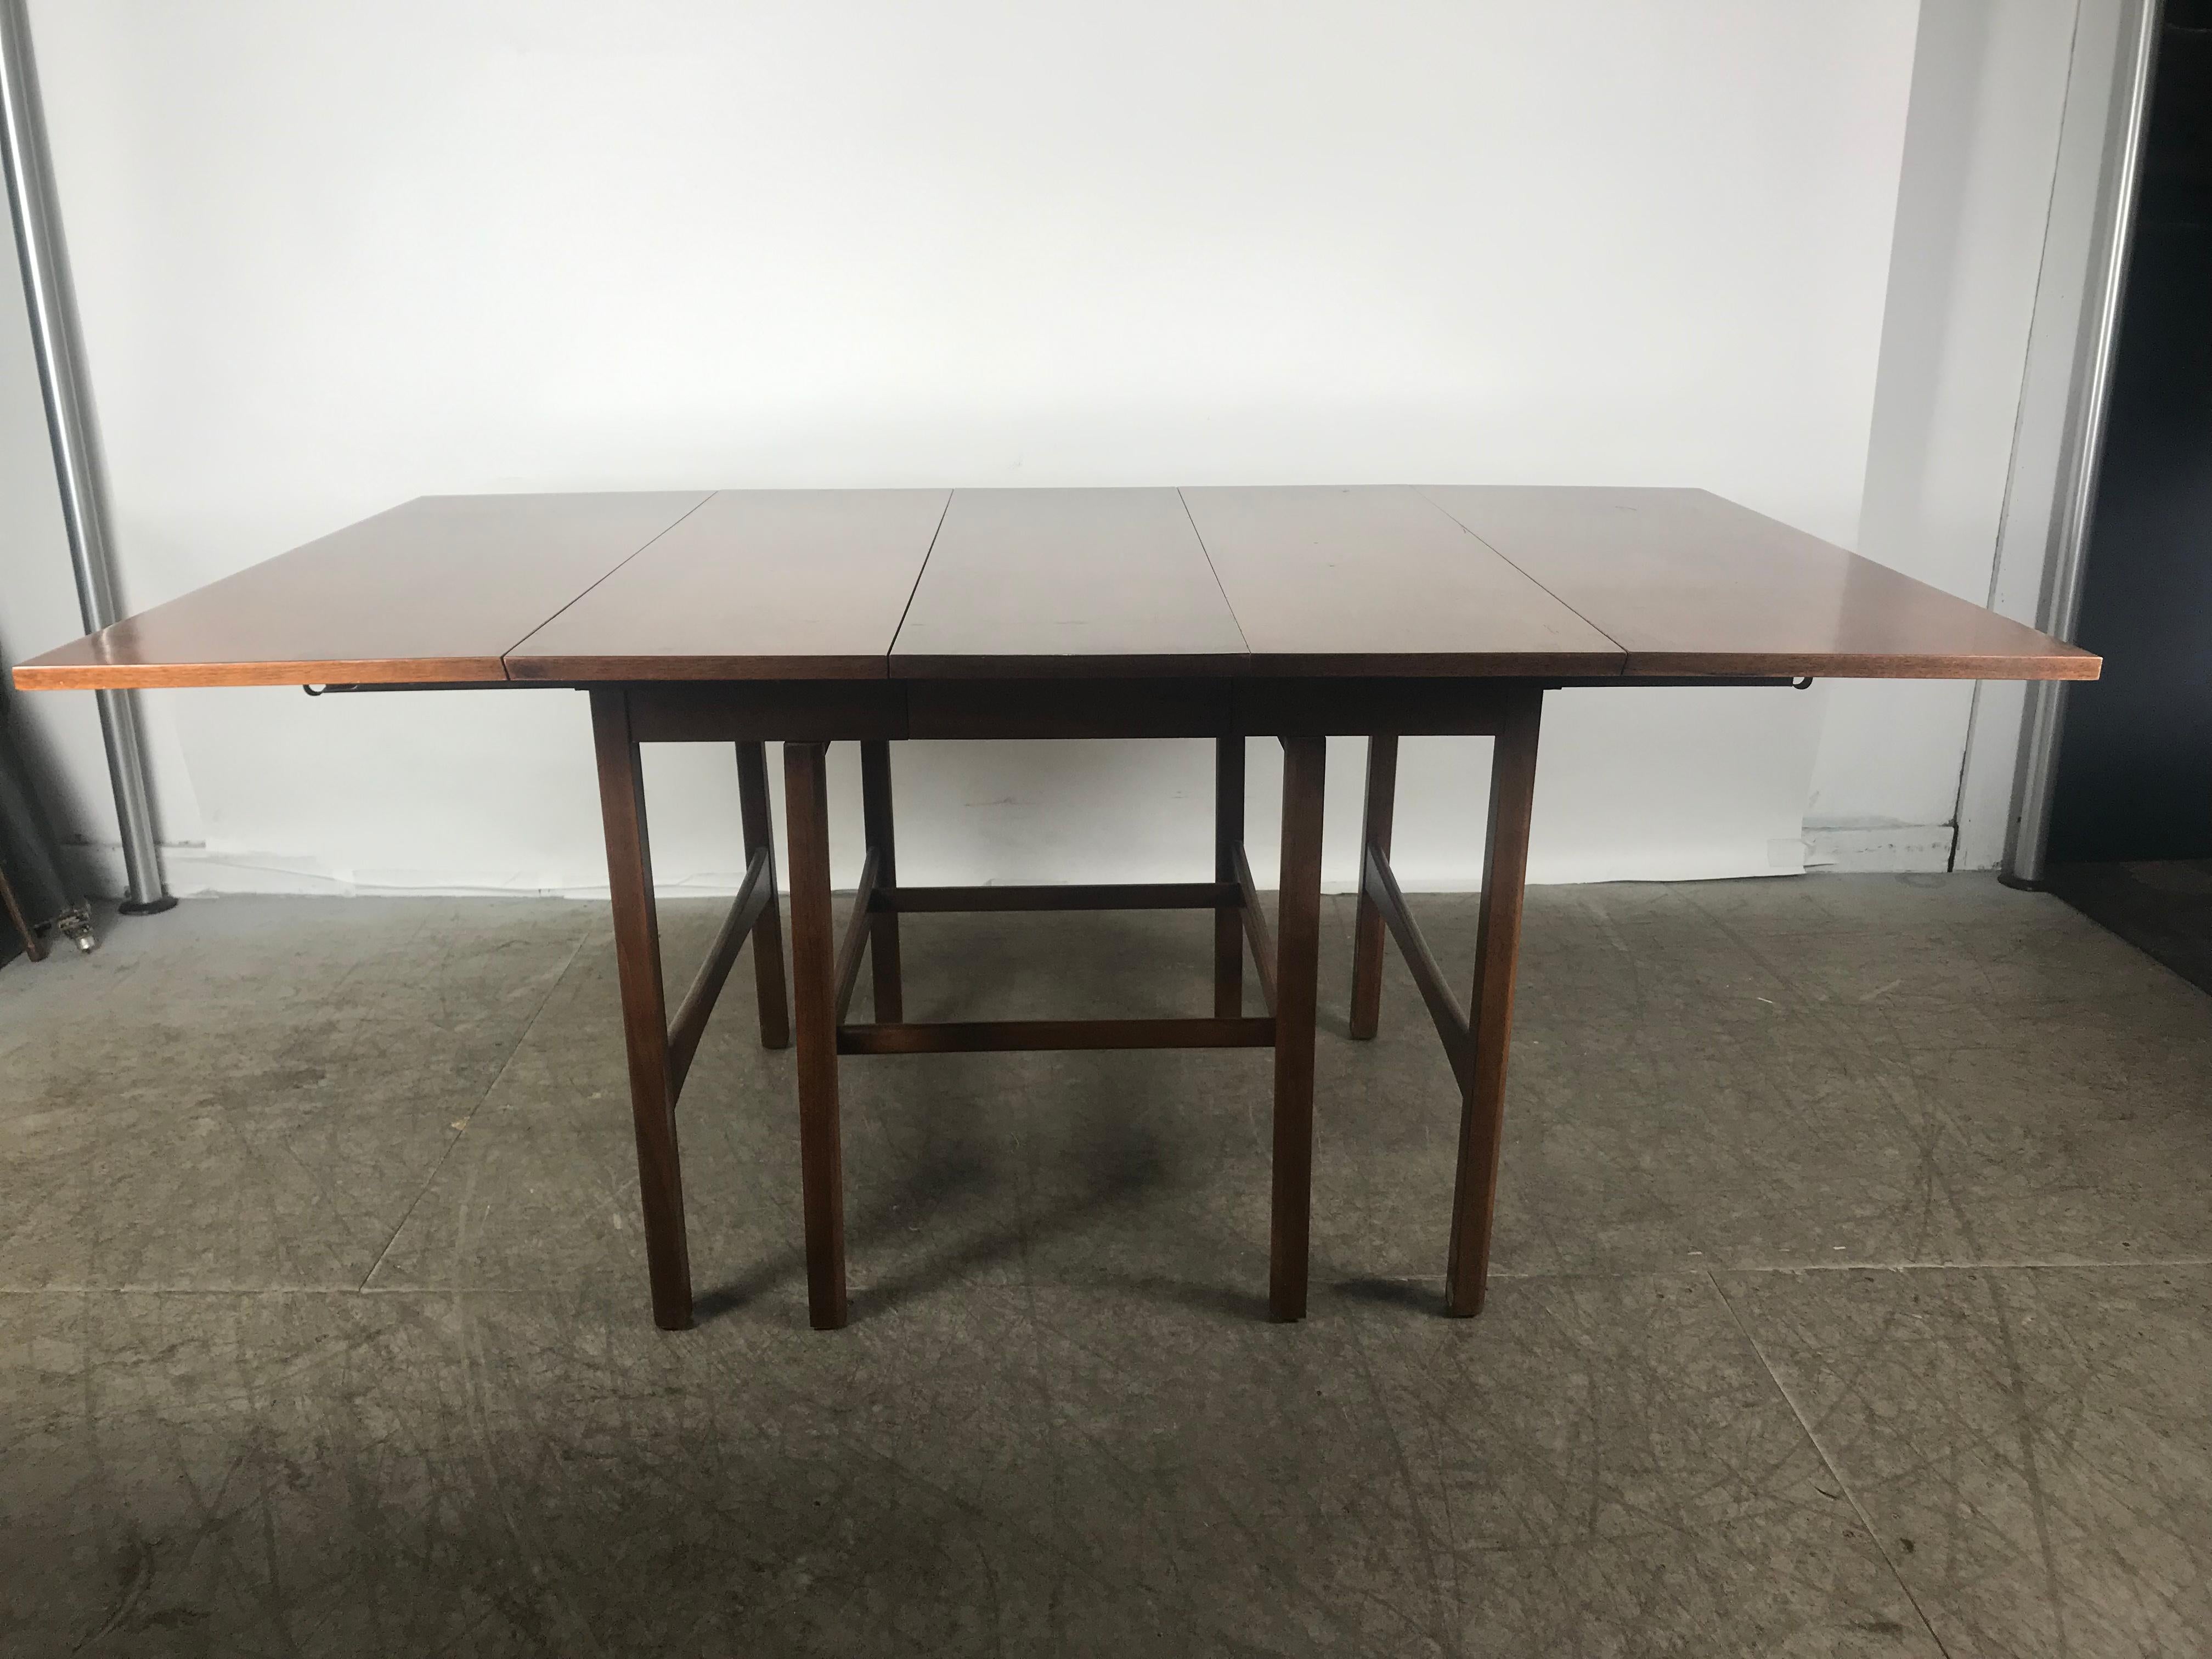 Modernist Walnut Dining Table, Merton Gershun for American of Martinsville In Good Condition For Sale In Buffalo, NY